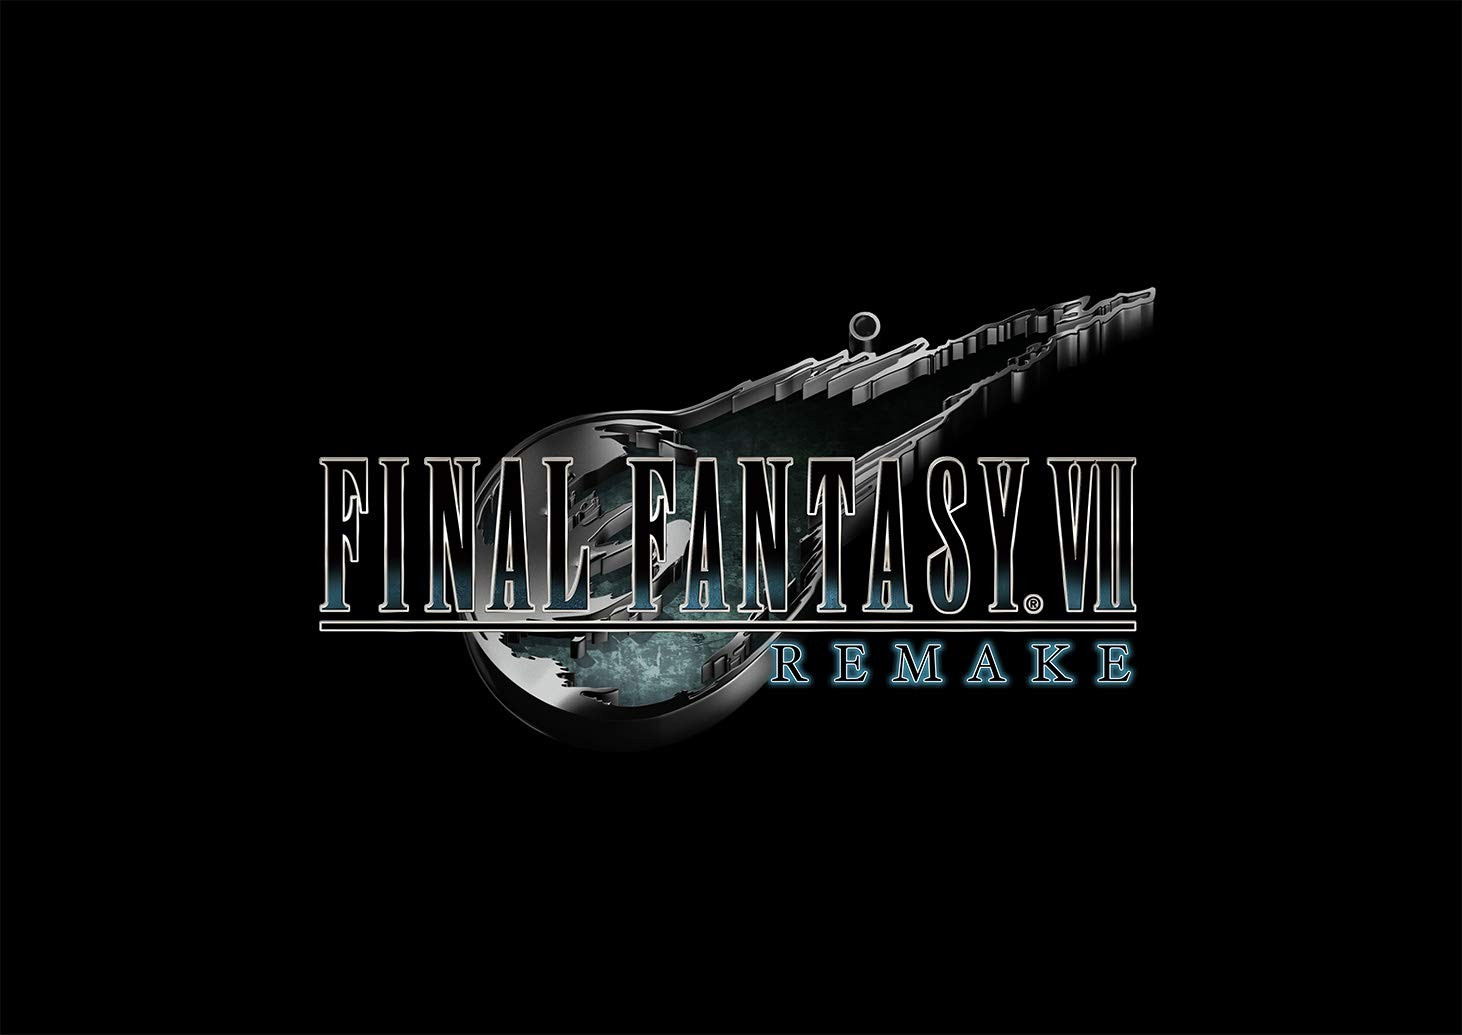 FF7, Final Fantasy 7 Remake, FF 7 Remake, Final Fantasy, Final Fantasy VII Remake, Square Enix, PS4, PlayStation 4, release date, gameplay, features, price, pre-order, Japan, Europe, US, North America, Australia, delayed, news, update